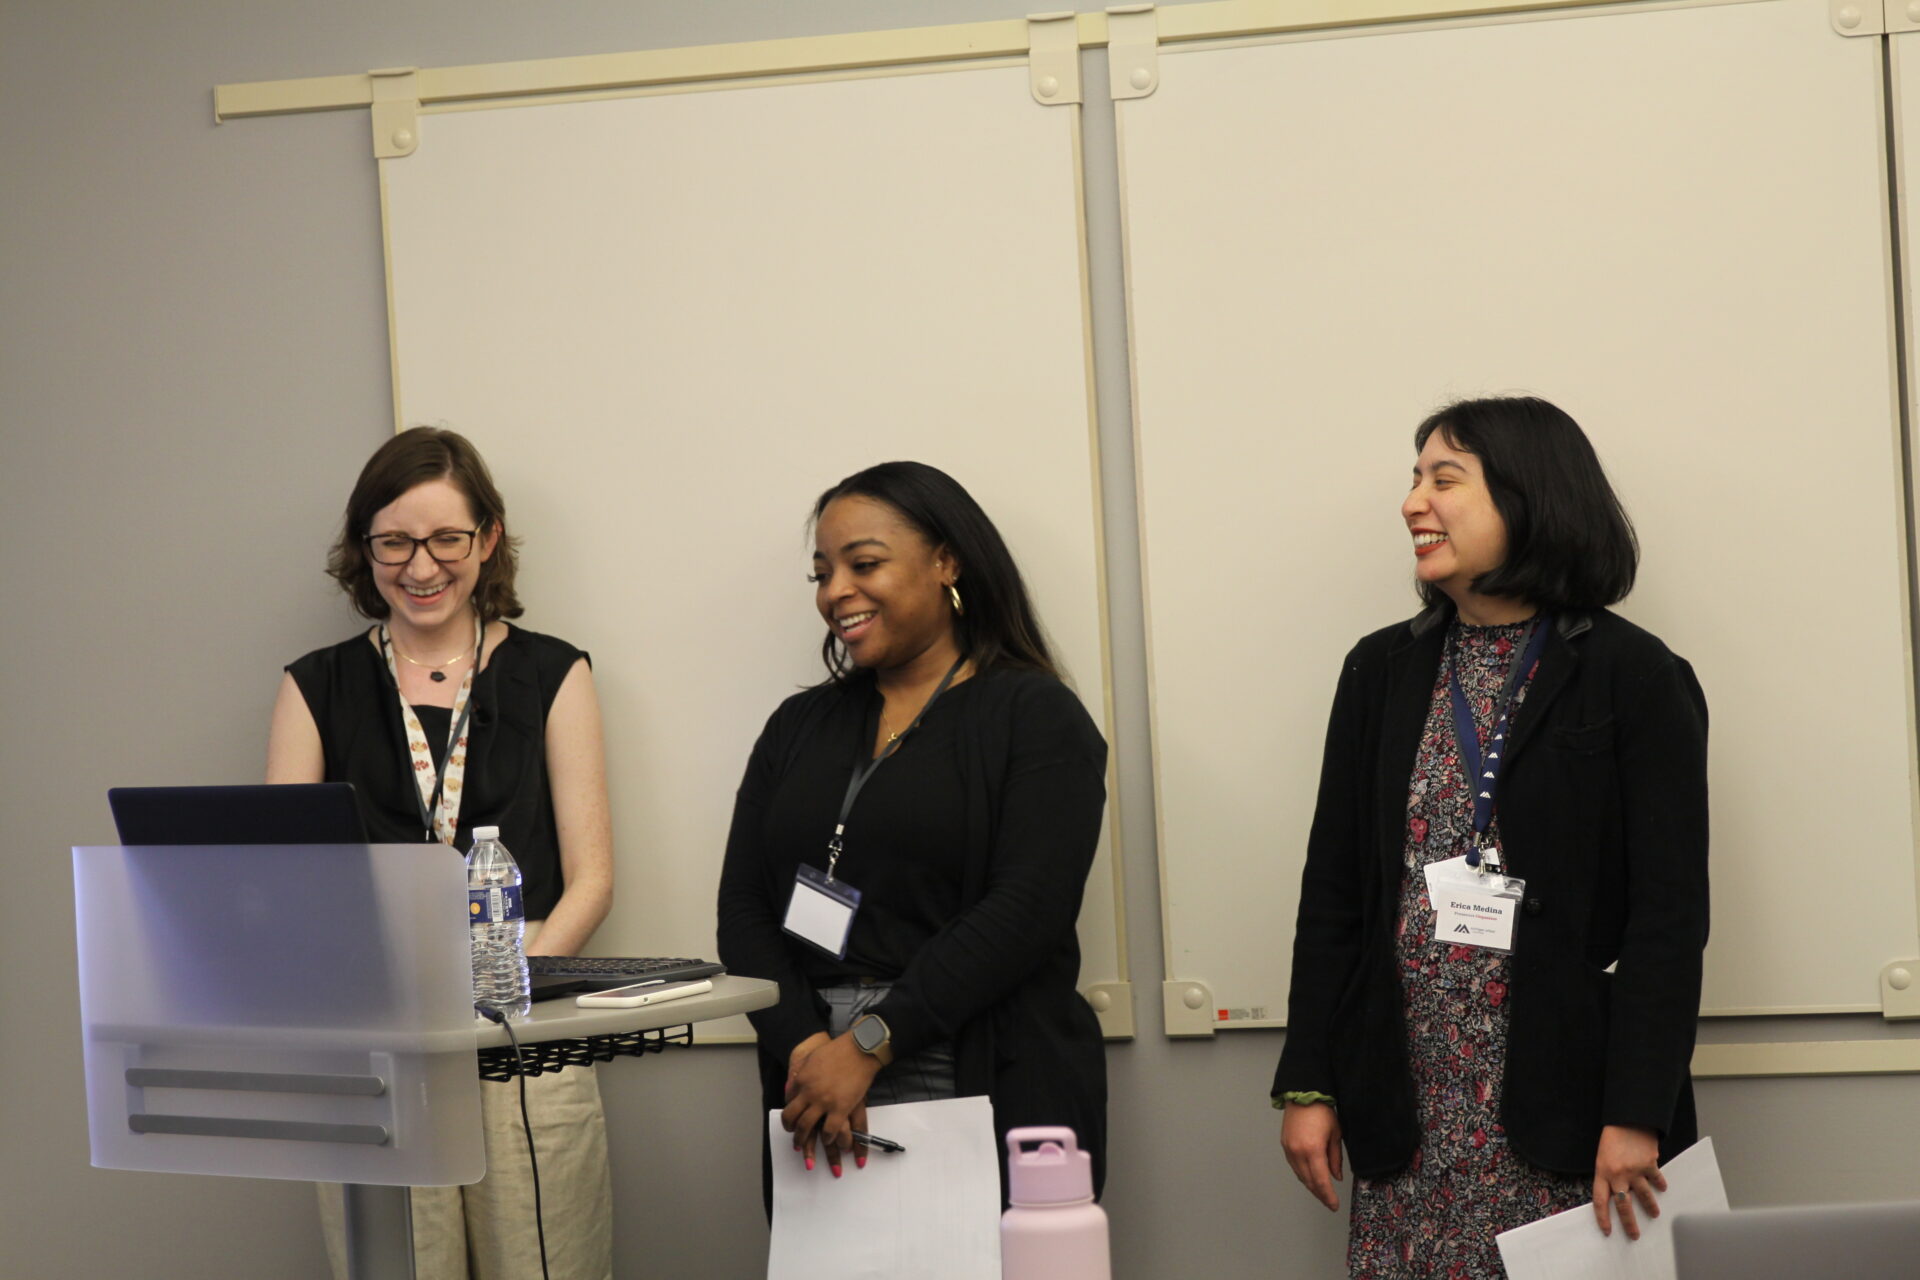 Kari Eidnes (MA '21, PsyD 2), Tara Pope (MA '21, PsyD 2), and Erica Medina (PsyD 2) presented on "Working With Children & Adolescents From Minoritized & Underserved Communities."